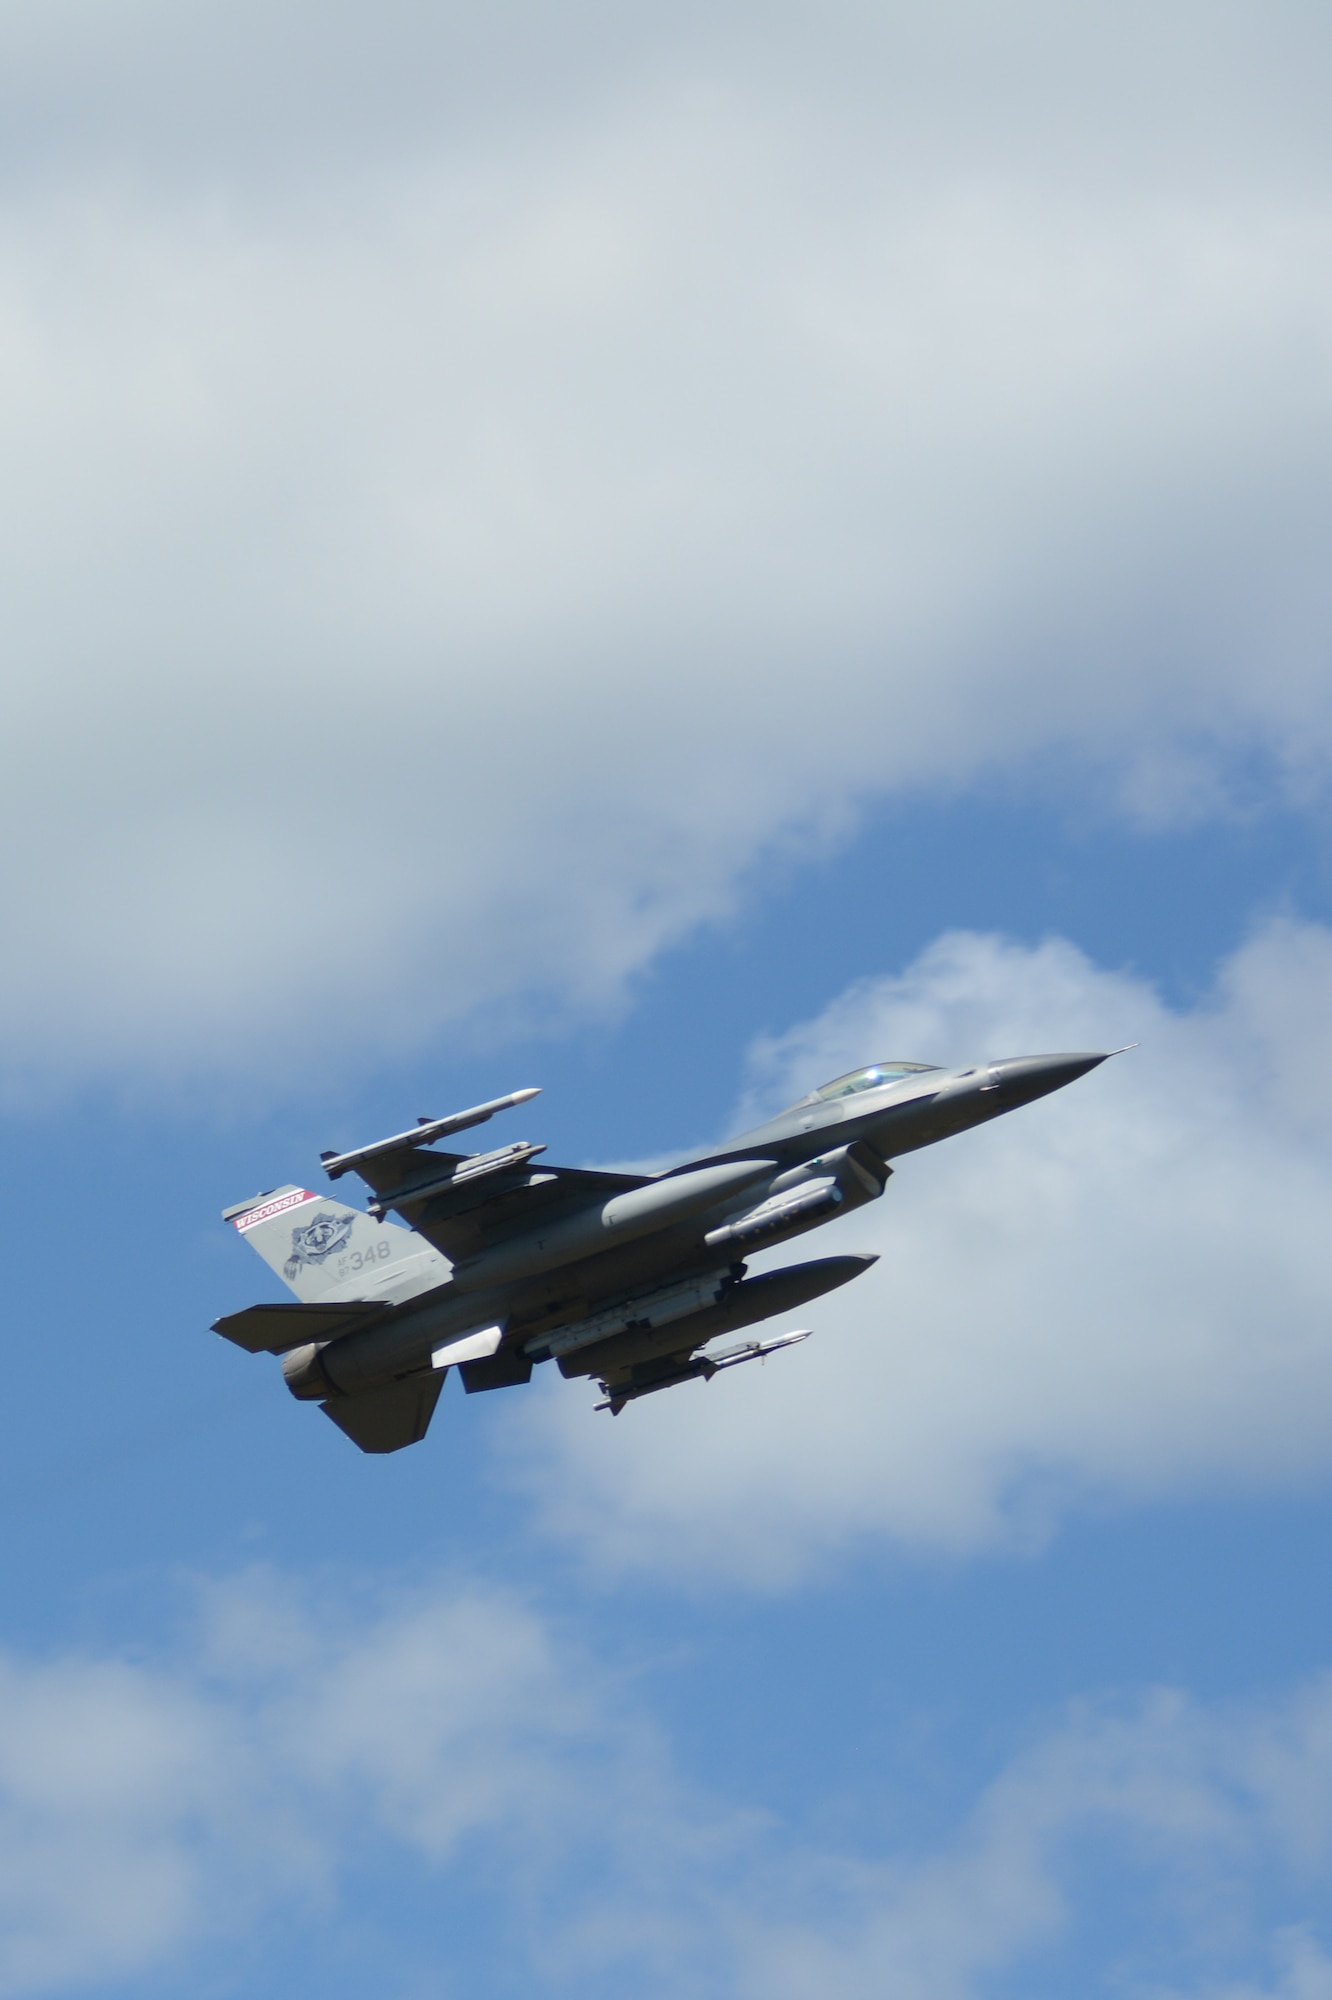 An F-16 Fighting Falcon flies past the tower at Hardwood Range, near Finley, Wis., during the 2016 Northern Lightning Exercise at Volk Field Air National Guard Base, Camp Douglas, Wis., Aug. 31, 2016. More than 1,000 service members and both fourth and fifth generation aircraft had the opportunity to train together during the two-week exercise. (U.S. Air National Guard photo by Staff Sgt. Andrea F. Rhode)